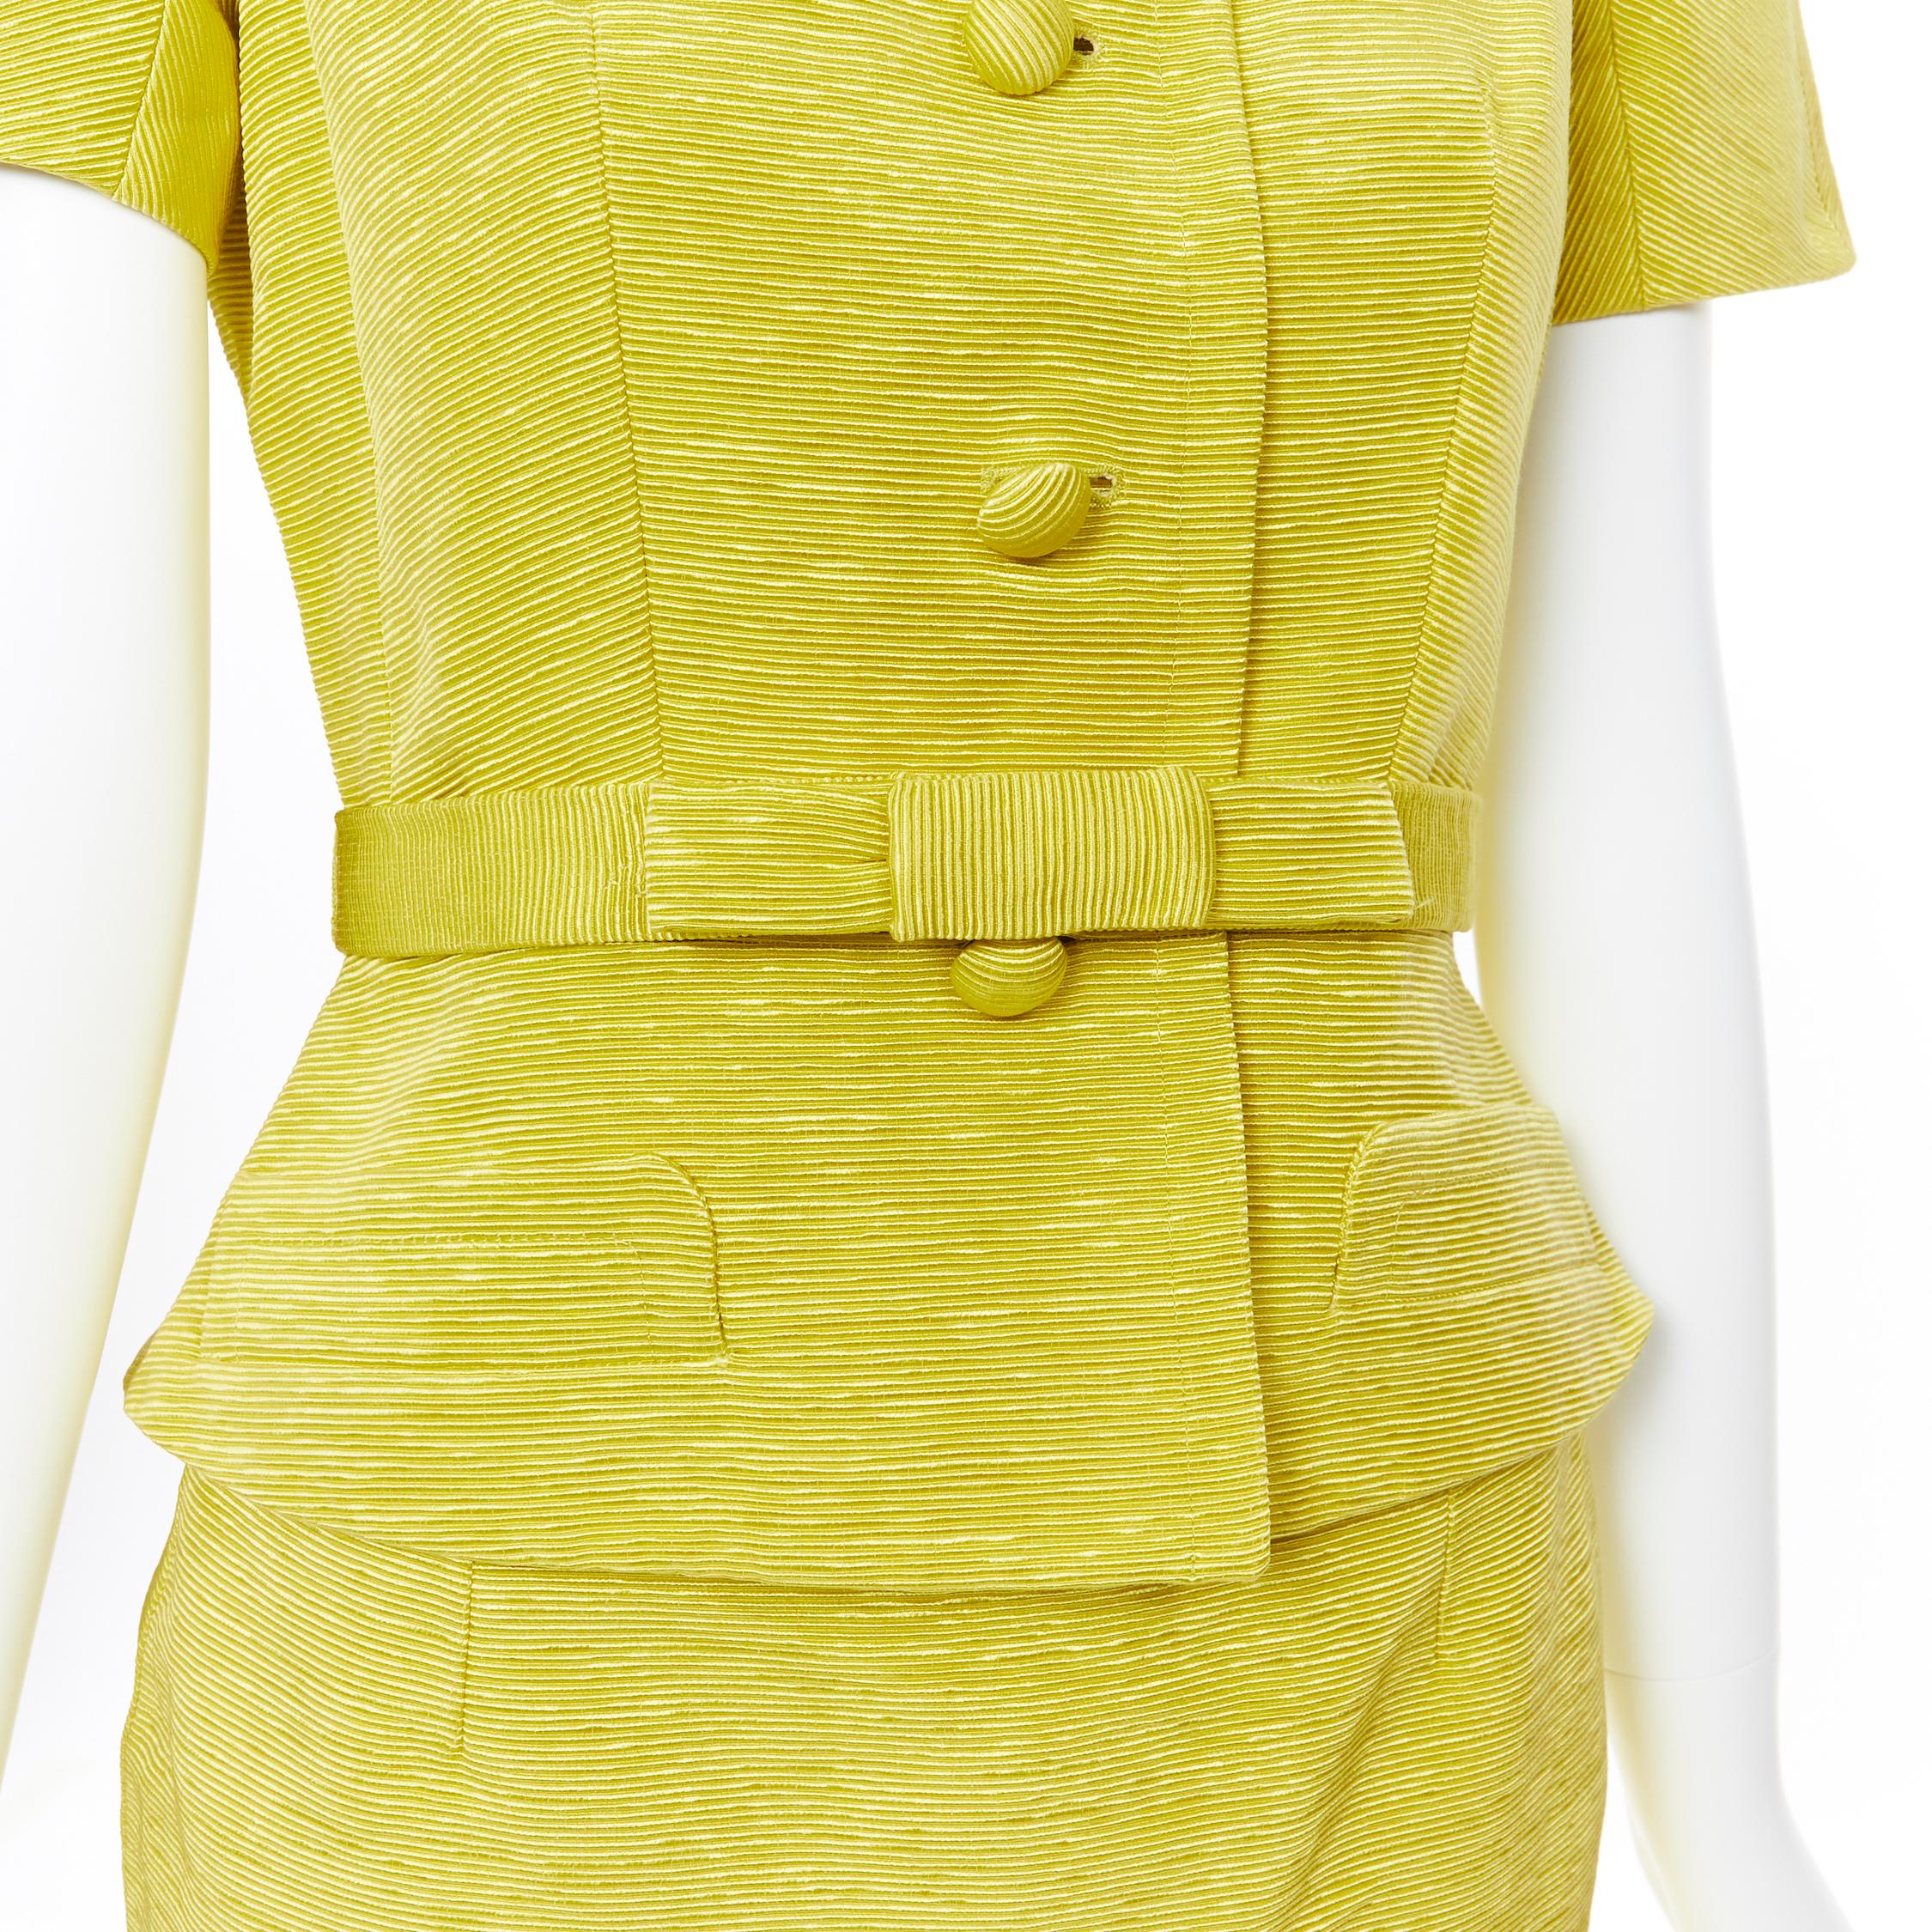 vintage CHRISTIAN DIOR yellow gold cap sleeve belted jacket skirt suit set FR38
Reference: CC/VAHI00332
Brand: Christian Dior
Material: Cotton
Color: Gold
Pattern: Solid
Closure: Zip
Extra Detail: Detachable snap button bow belt. Zip back closure on